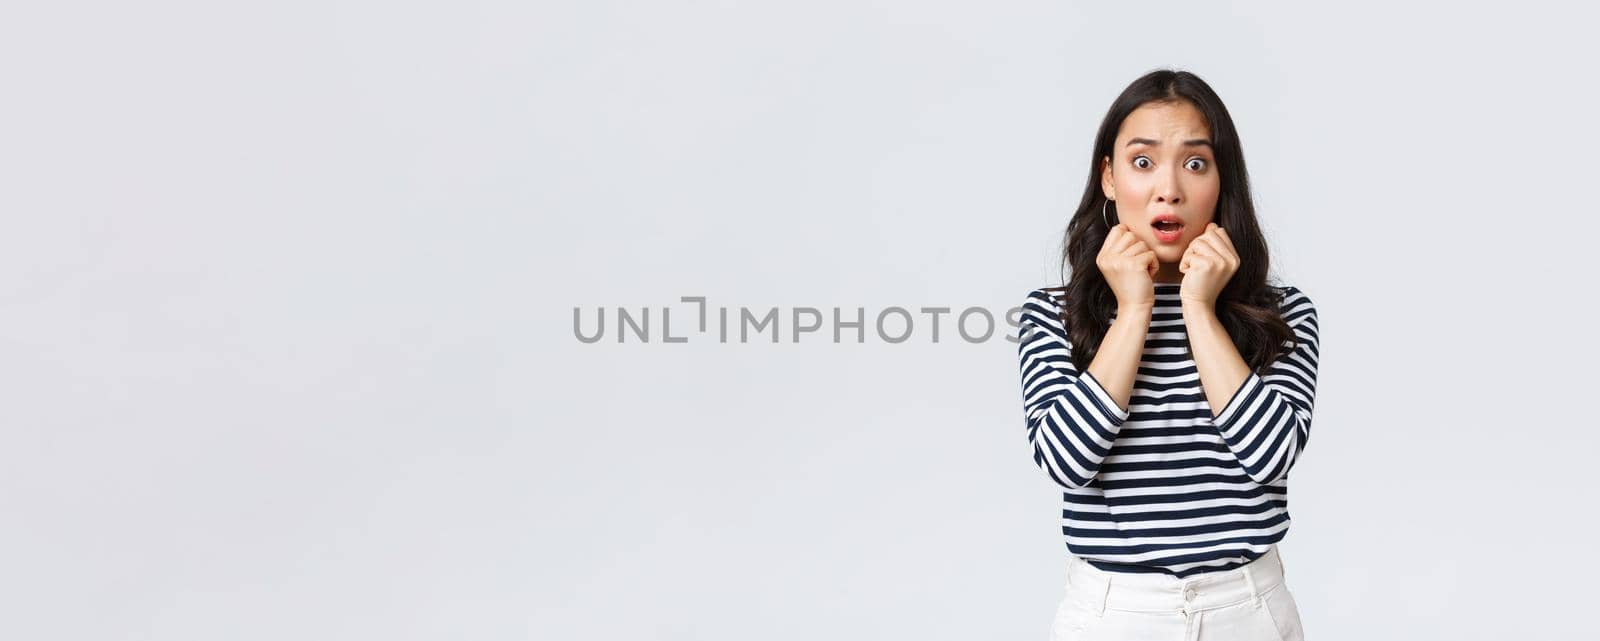 Lifestyle, people emotions and casual concept. Scared worried asian girl in striped shirt, gasping looking alarmed, got in trouble, find out shocking truth, standing white background.